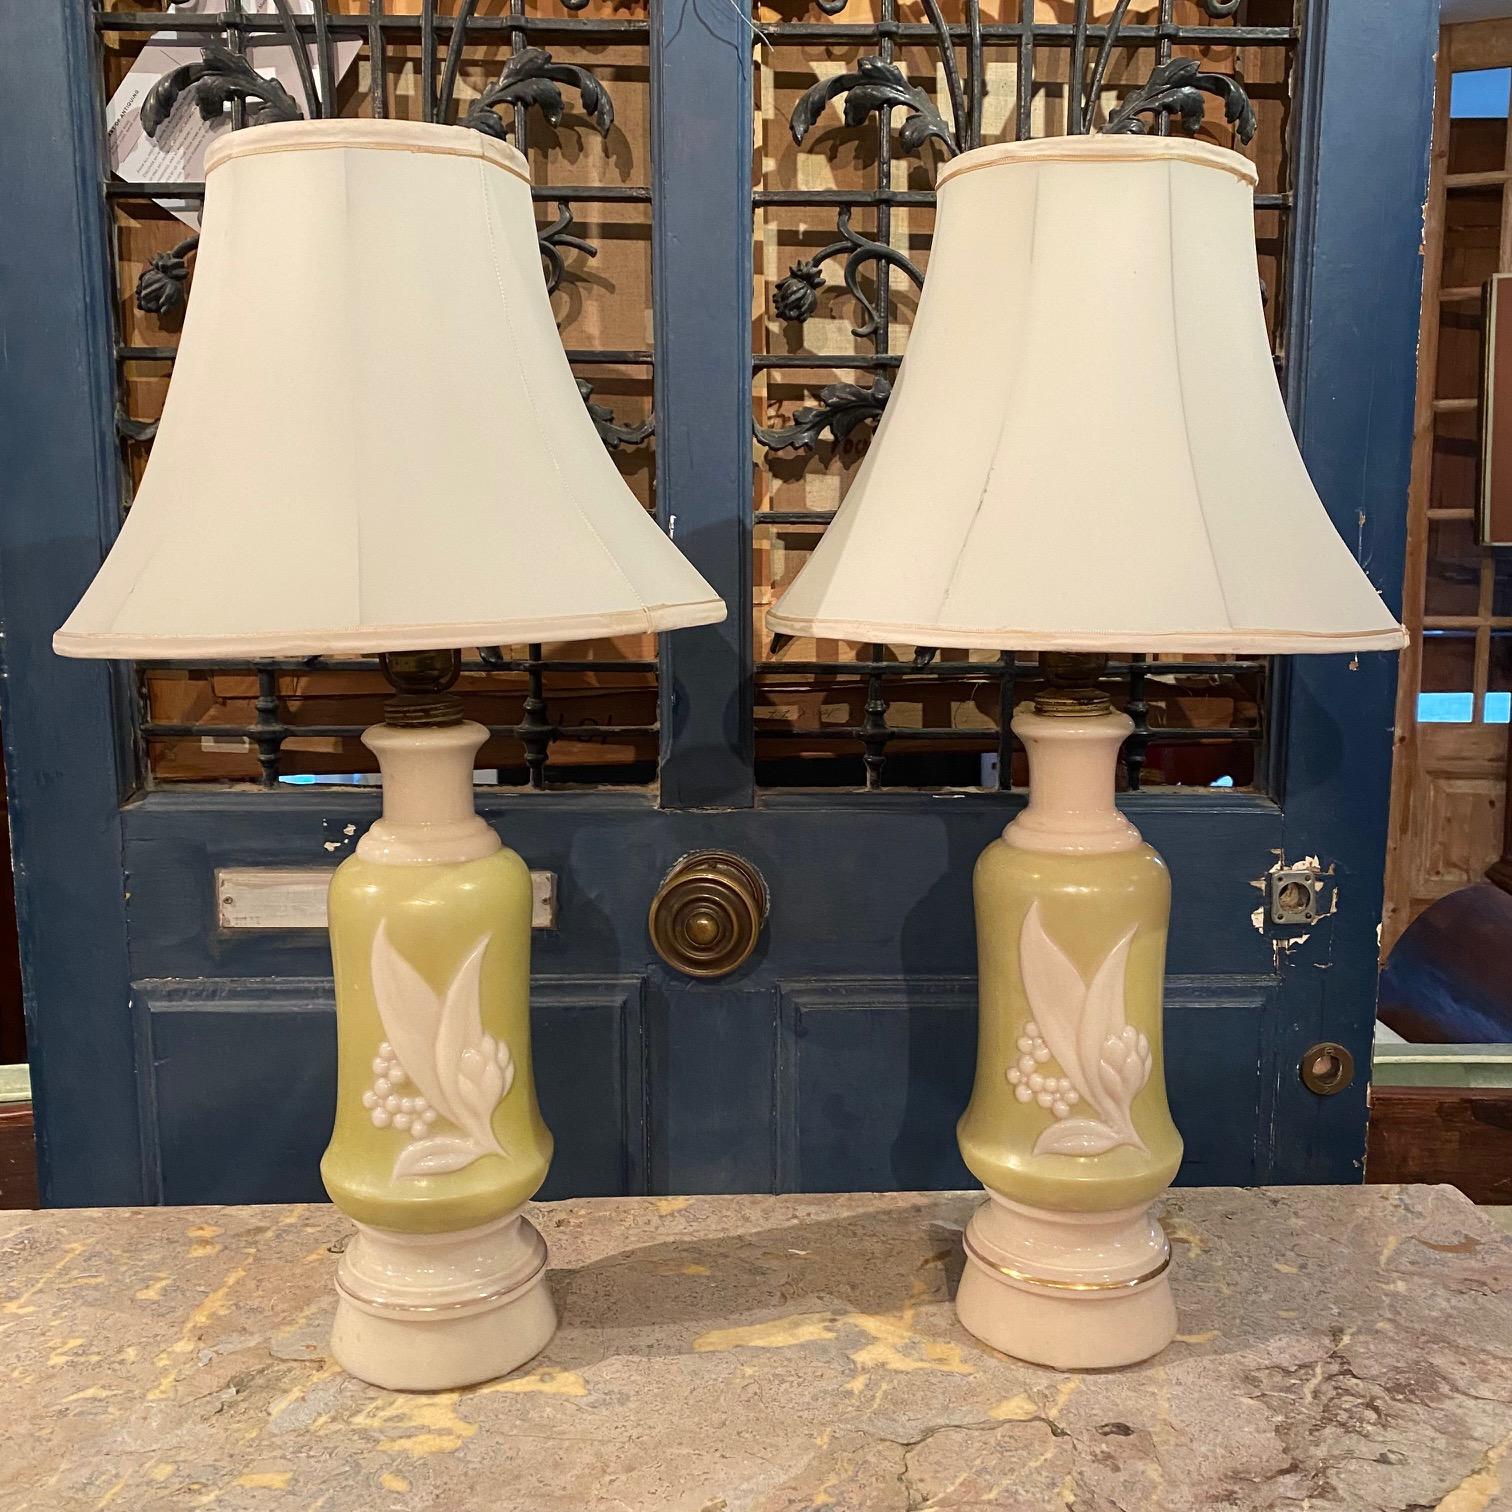 Wonderful pair of lime green vintage molded glass table lamps with original shades.